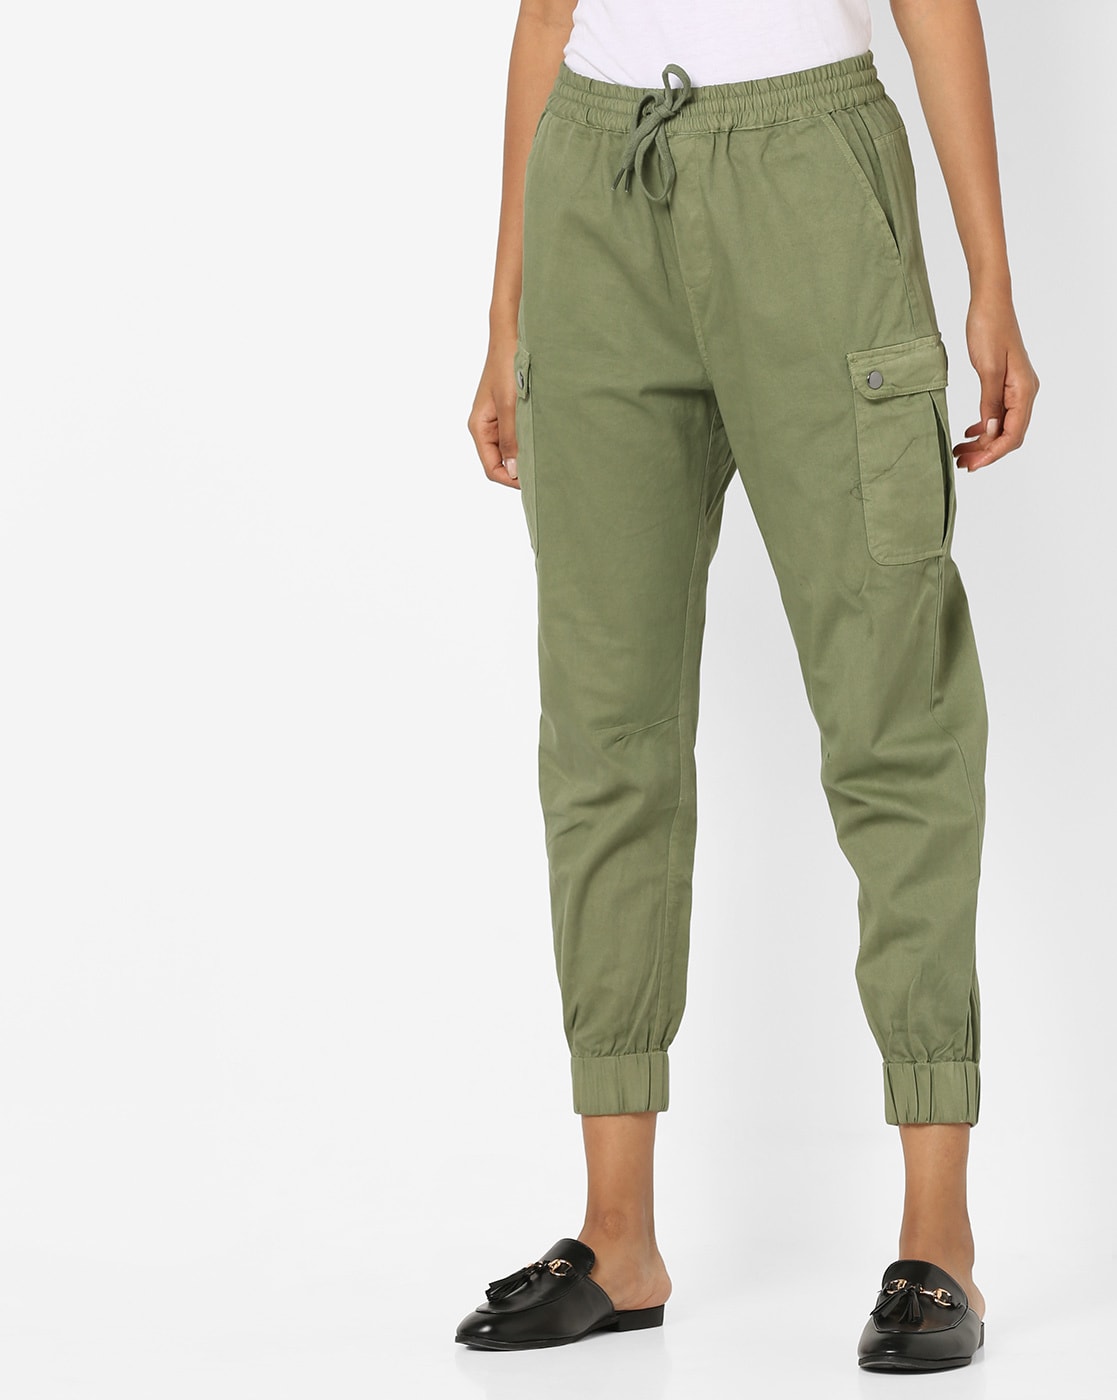 Buy Green Trousers & Pants for Women by Glamorous Online | Ajio.com